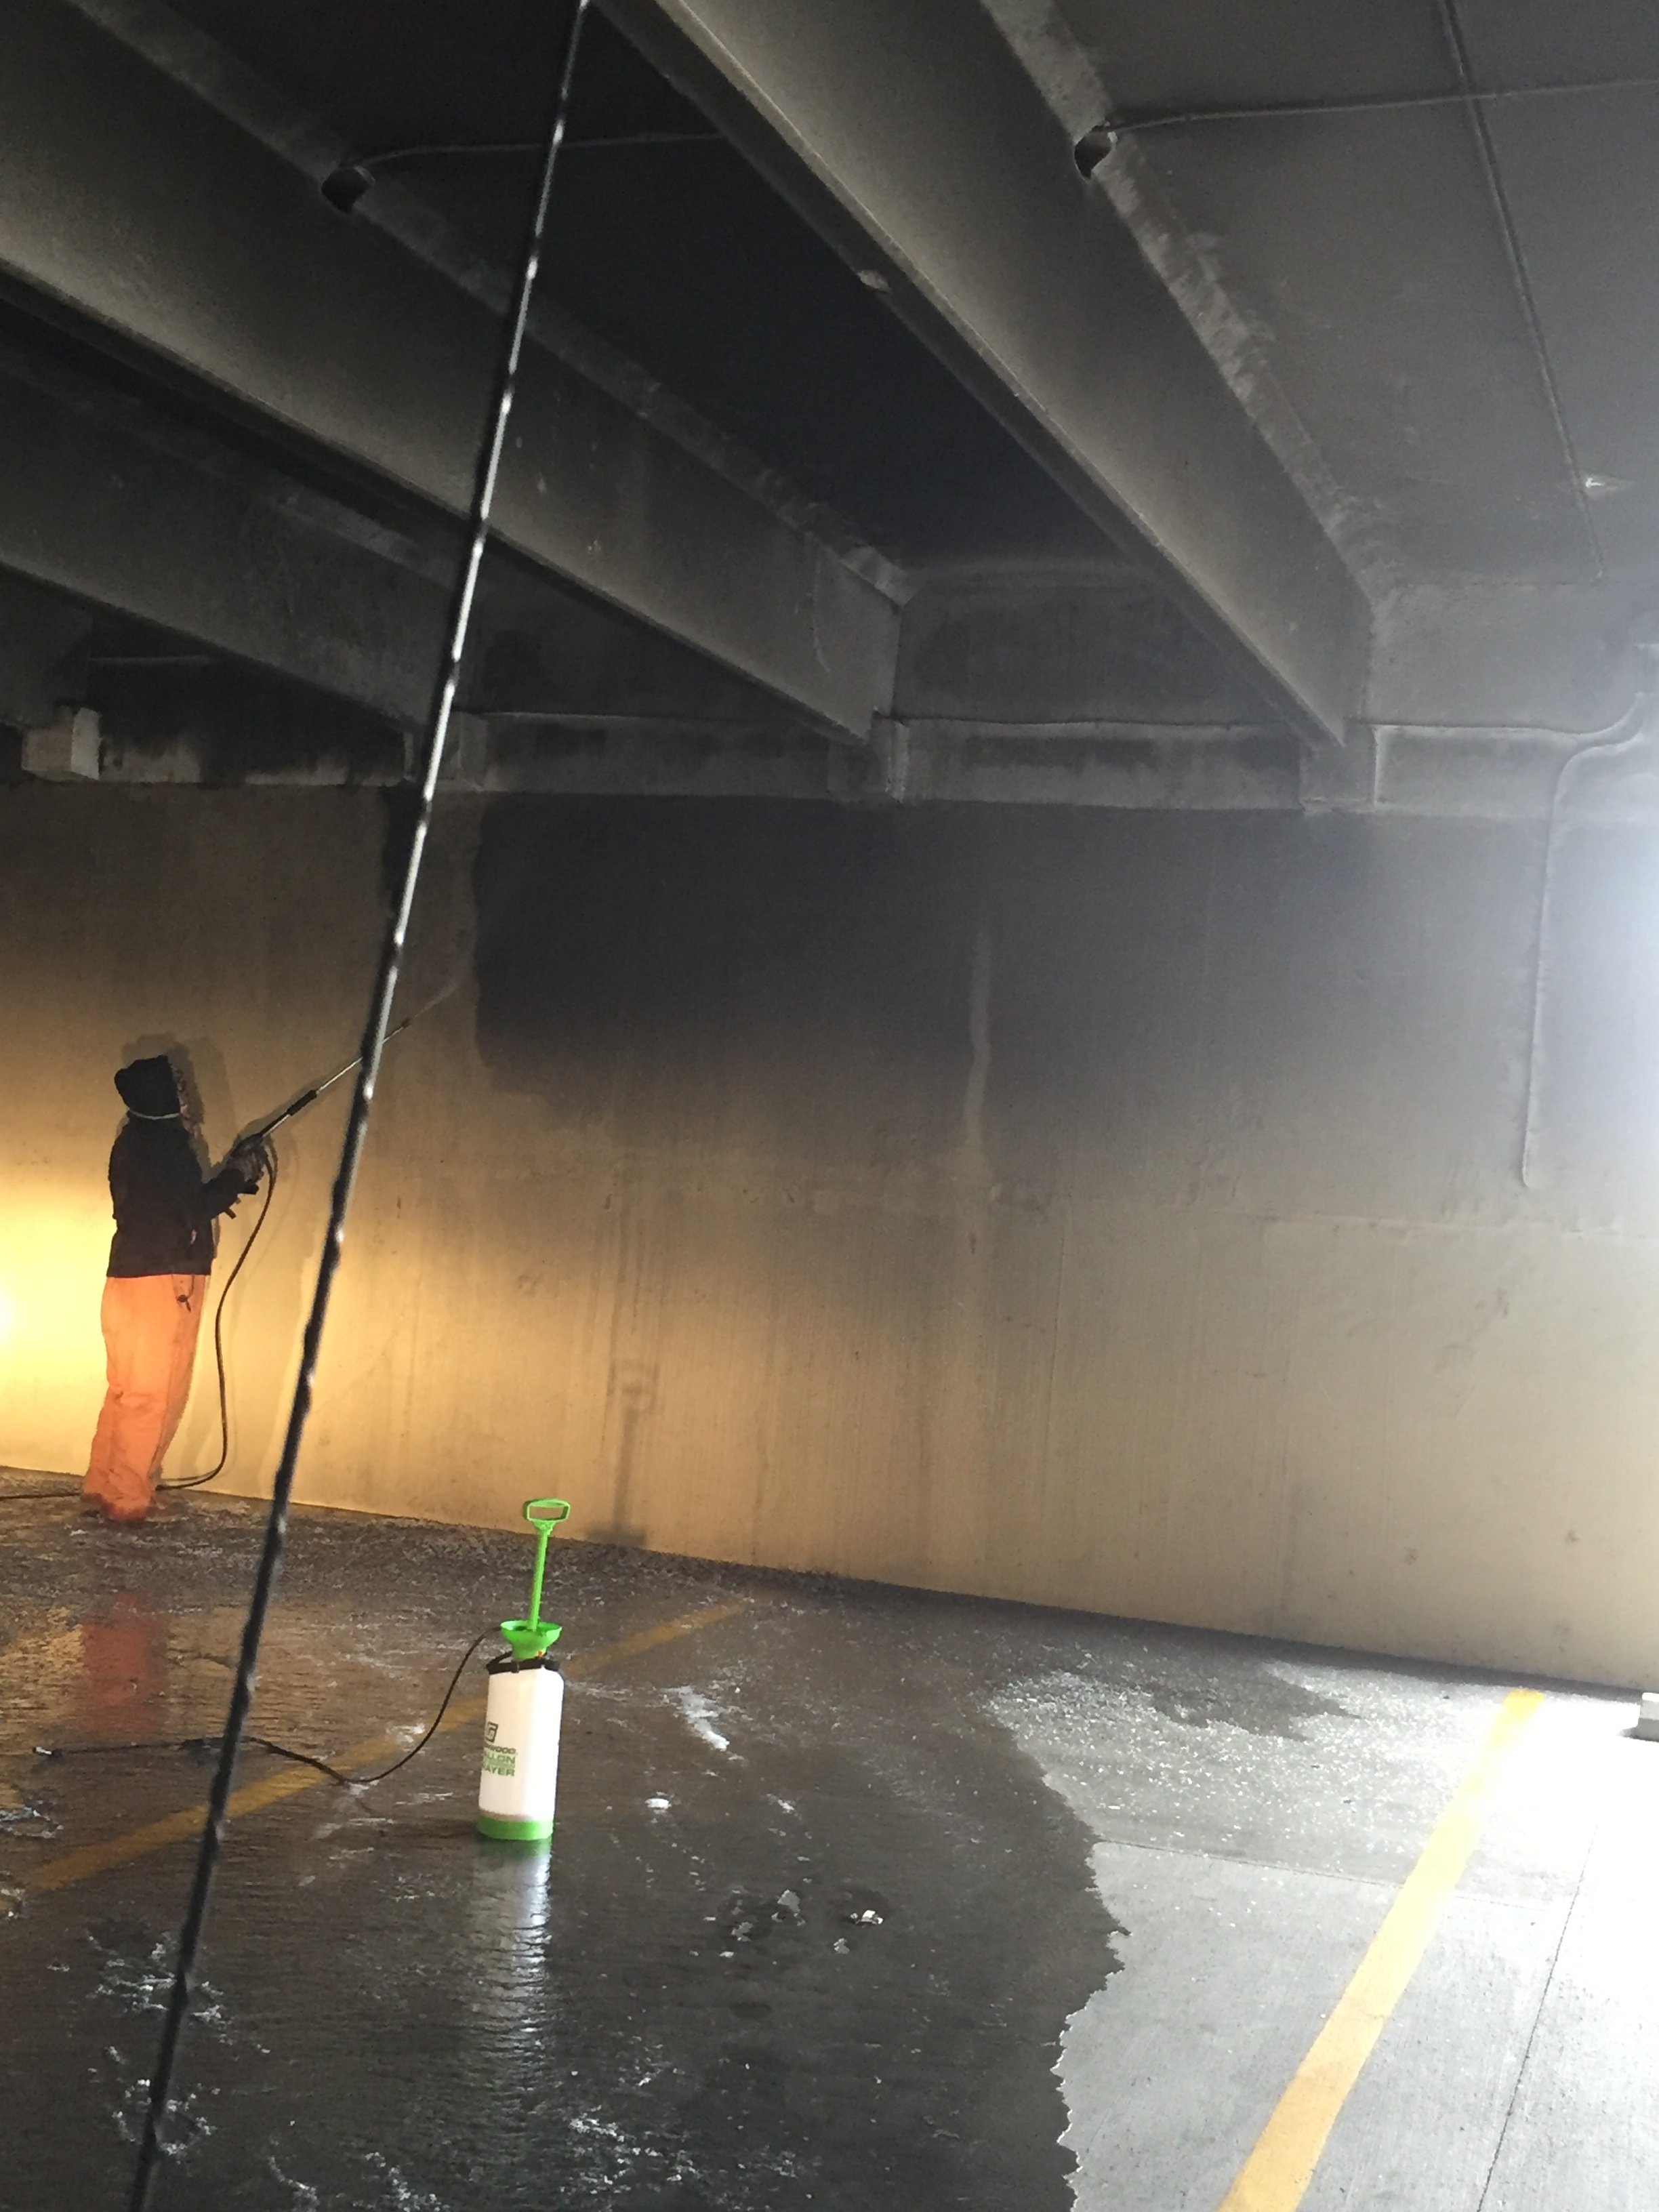 Fire damage? Don't worry, SERVPRO is here to help!